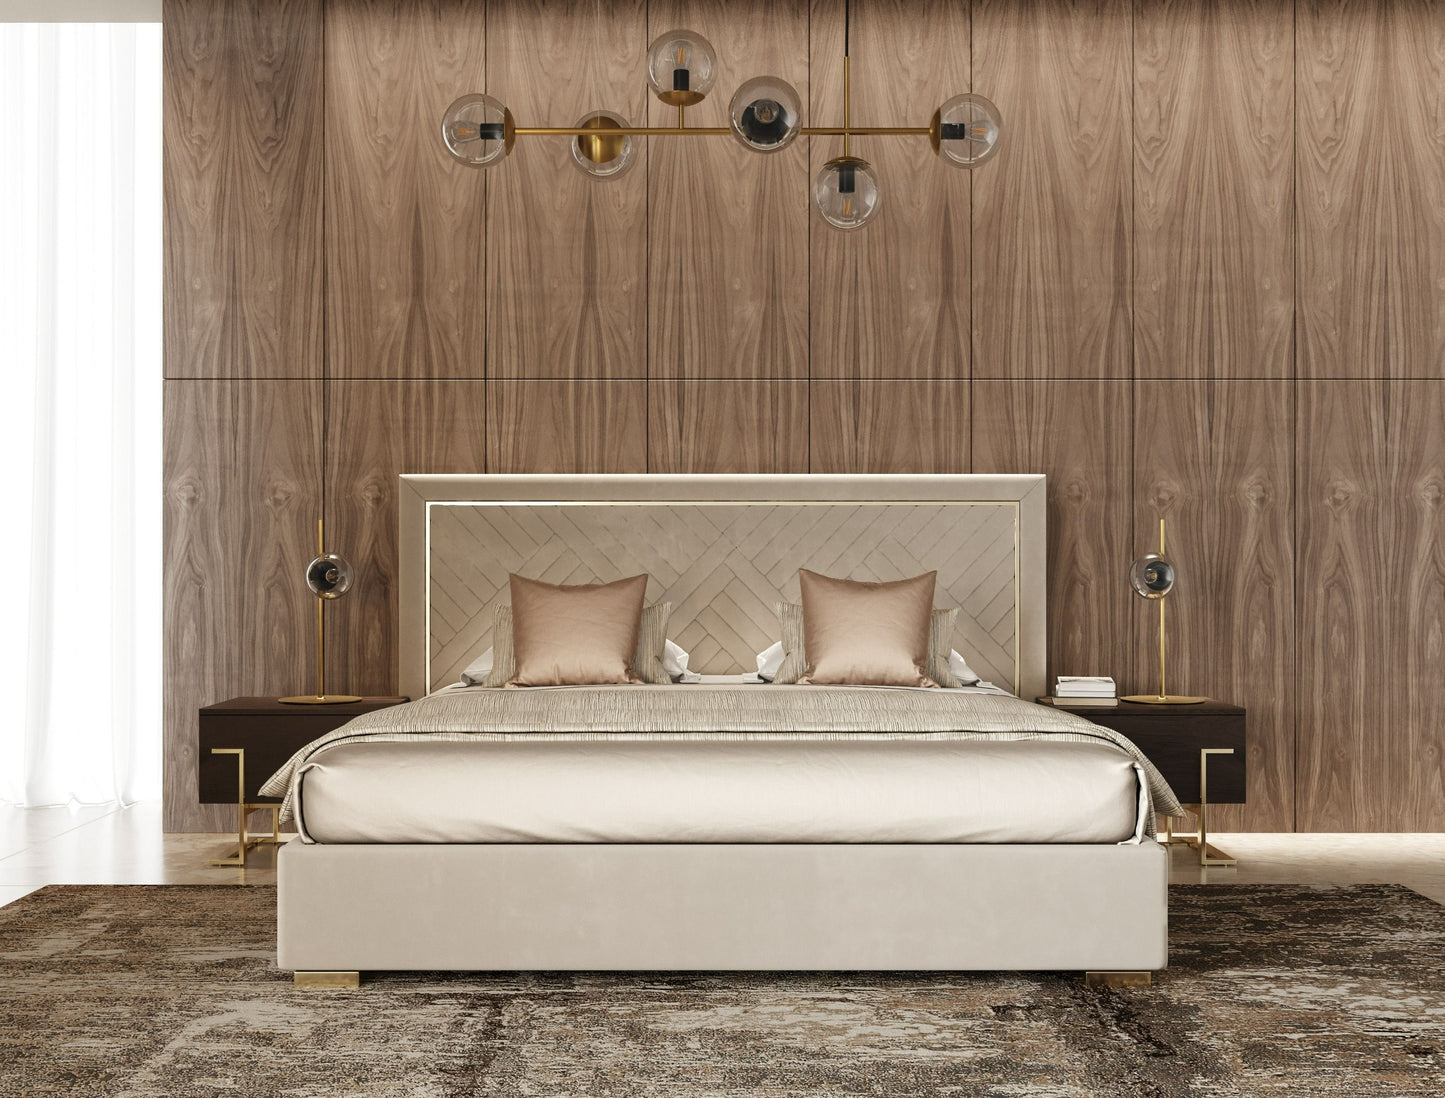 Modrest Corrico - Modern Off White and Champagne Gold Bedroom Set